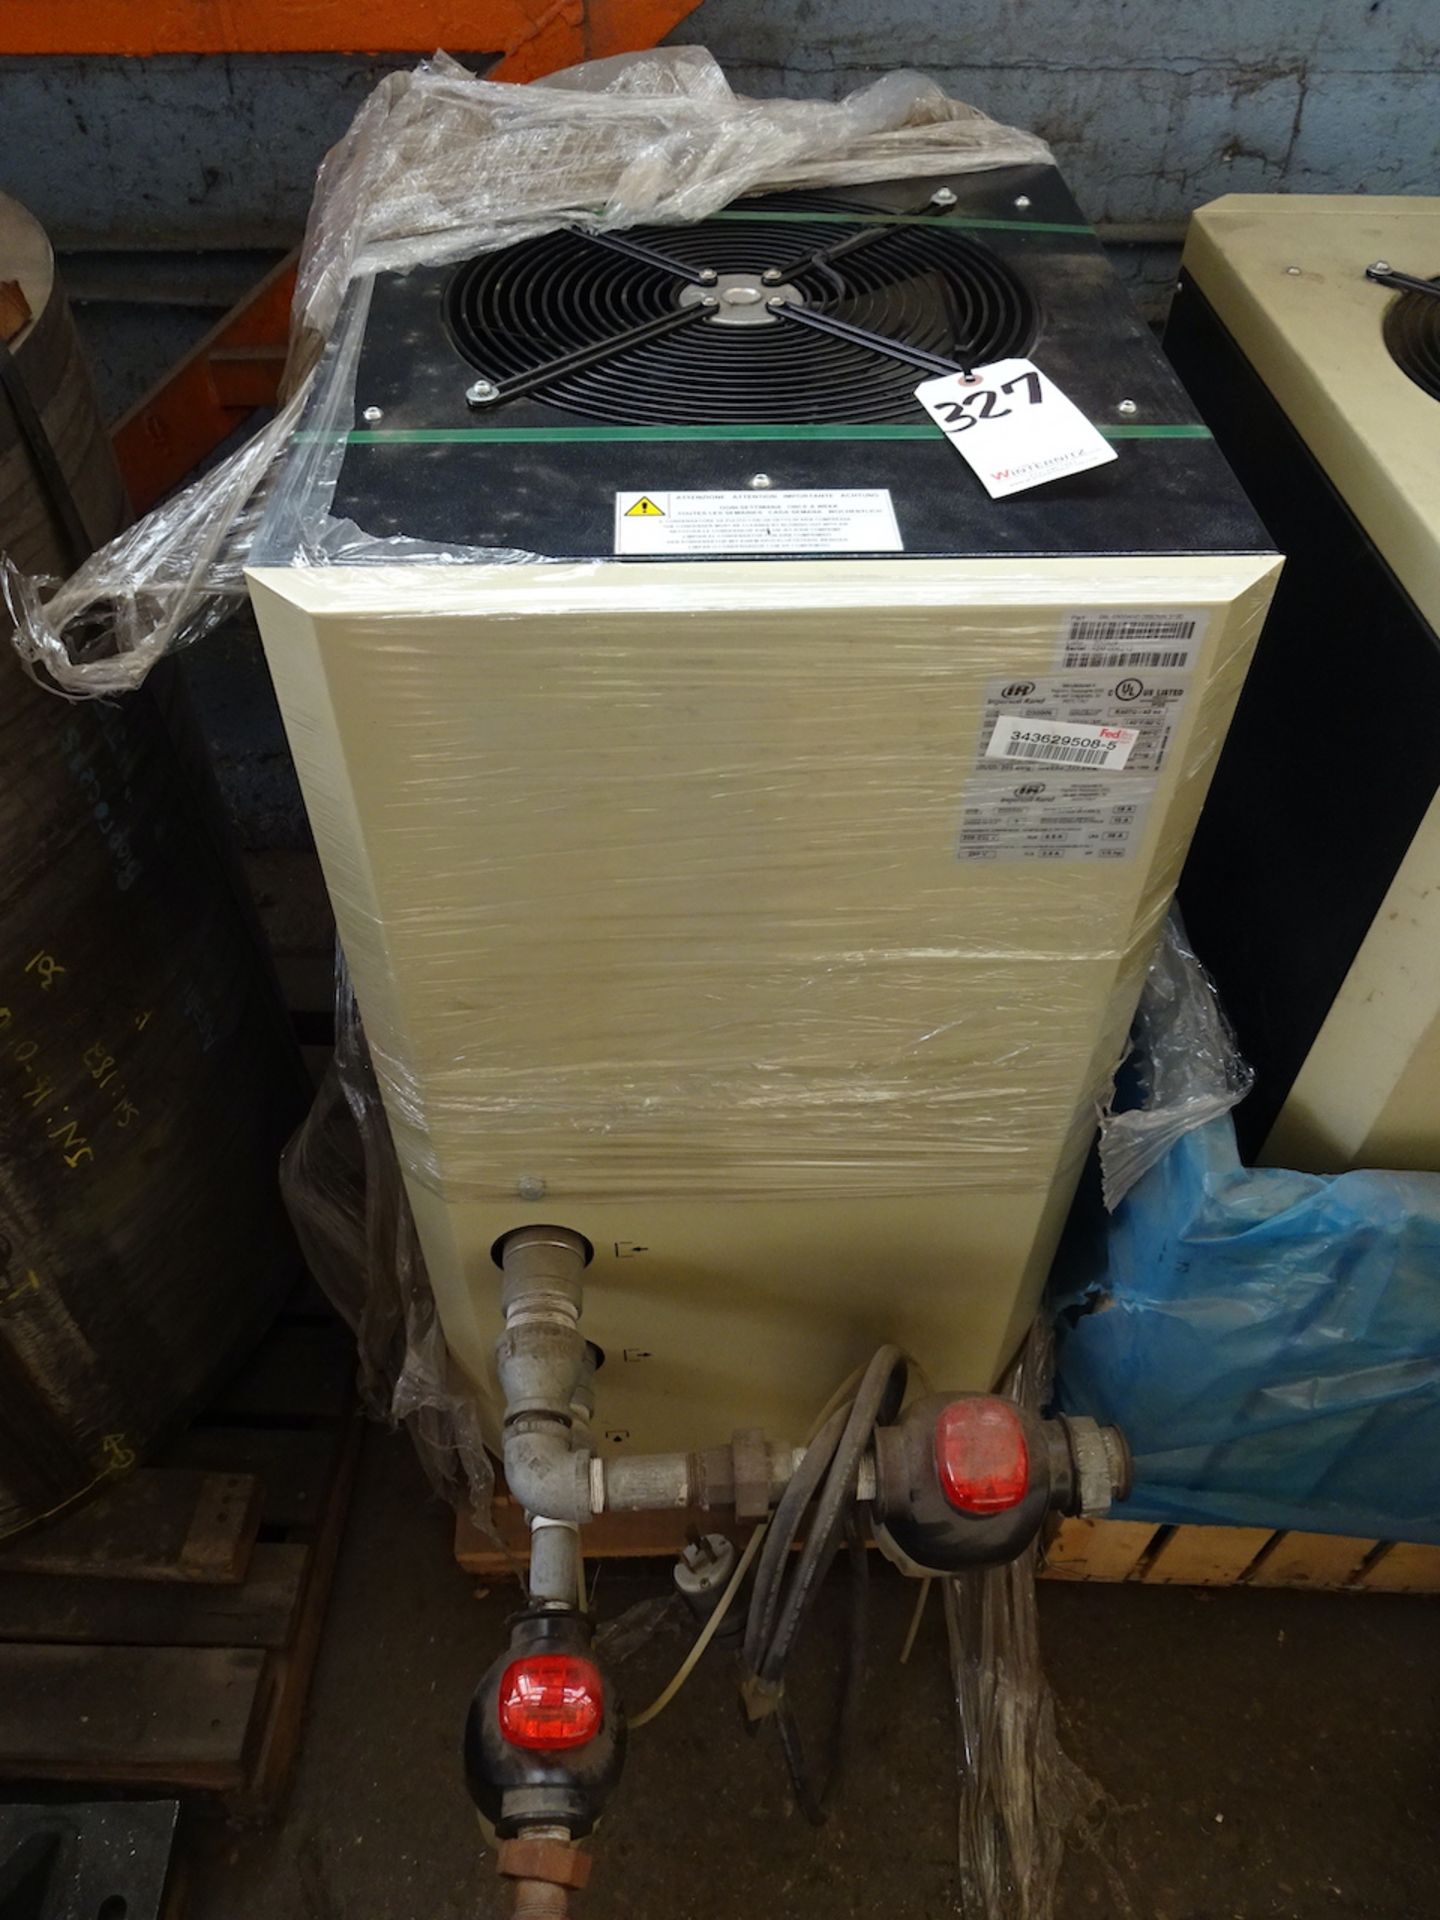 Ingersoll Rand Model D300IN Refrigerated Air Dryer, S/N 12M-006212